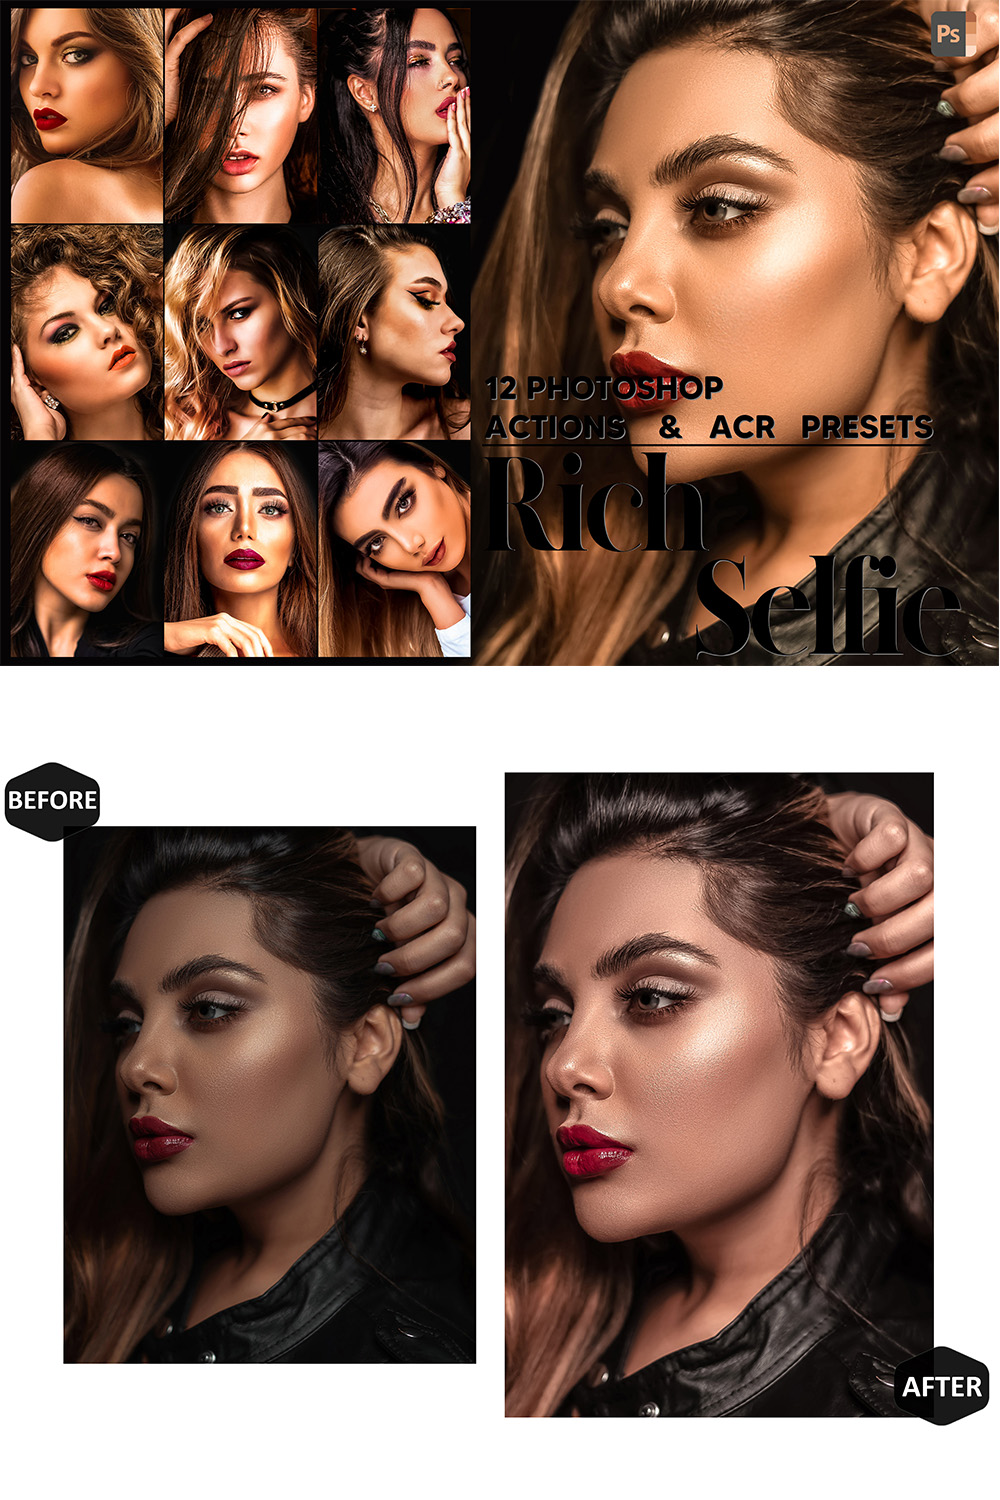 12 Photoshop Actions, Rich Selfie Ps Action, Beautiful ACR Preset, Portrait Ps Filter, Atn Pictures And style Theme For Instagram, Blogger pinterest preview image.